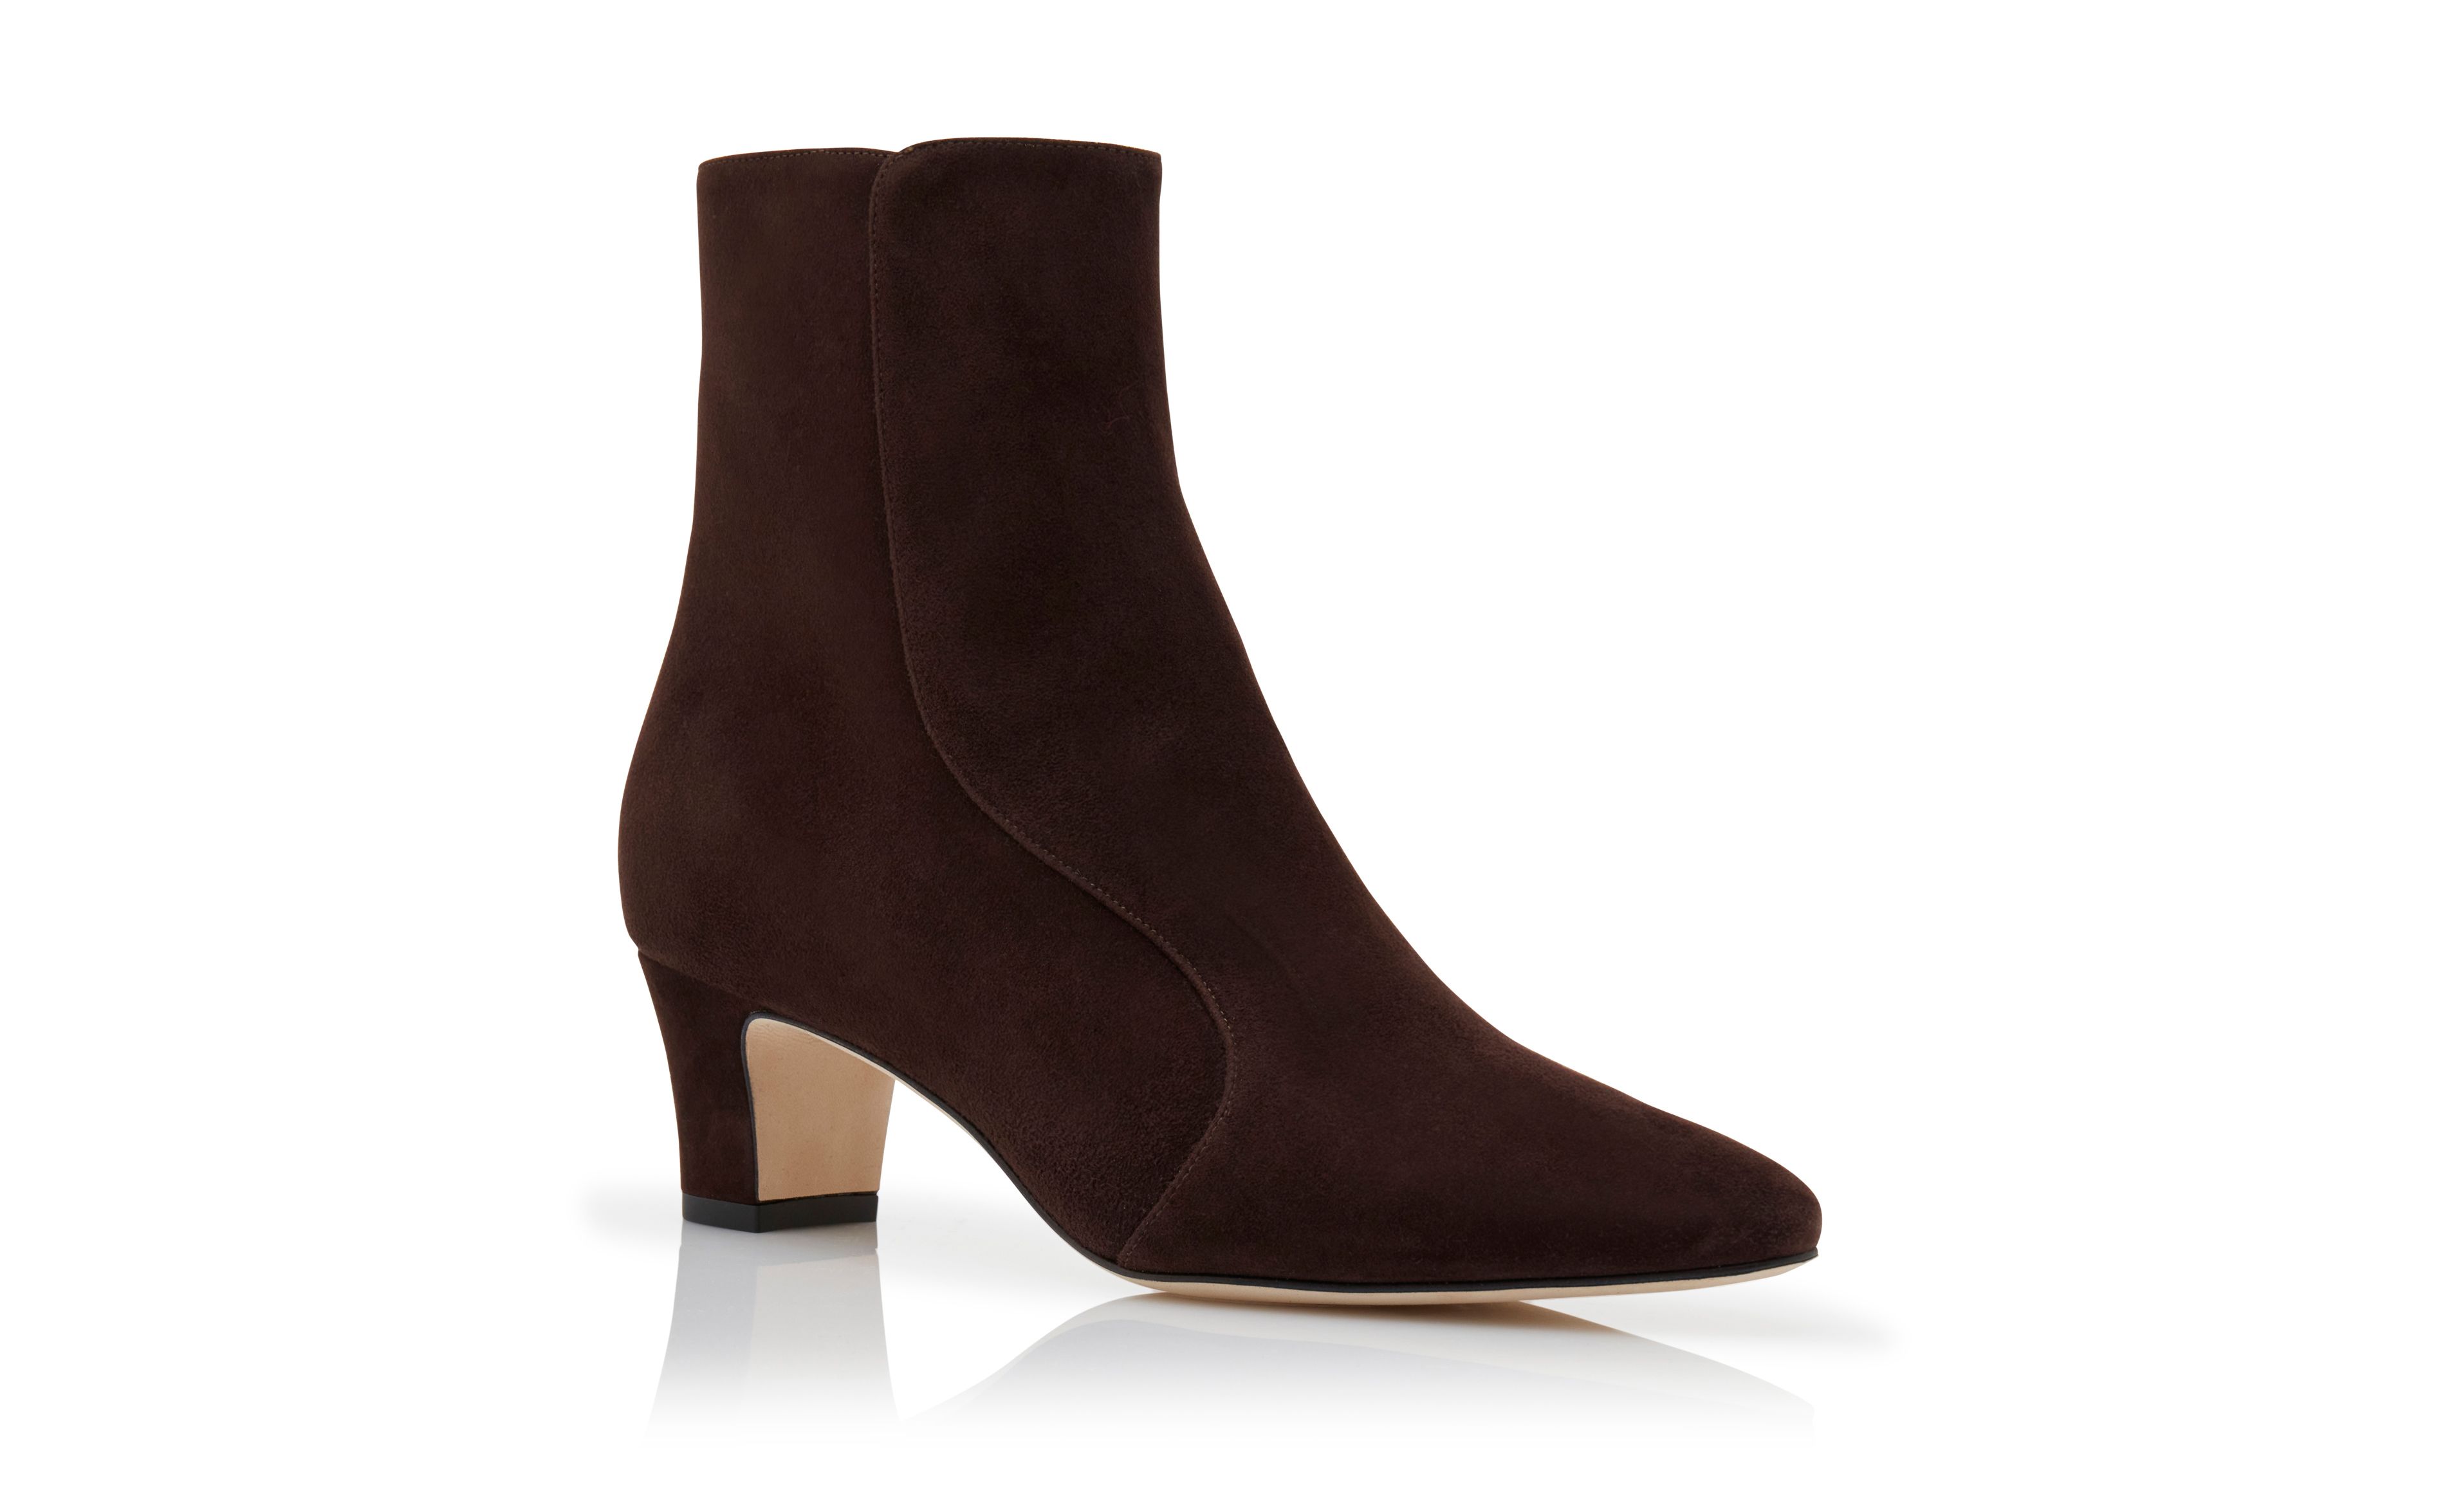 Designer Brown Suede Round Toe Ankle Boots - Image Upsell